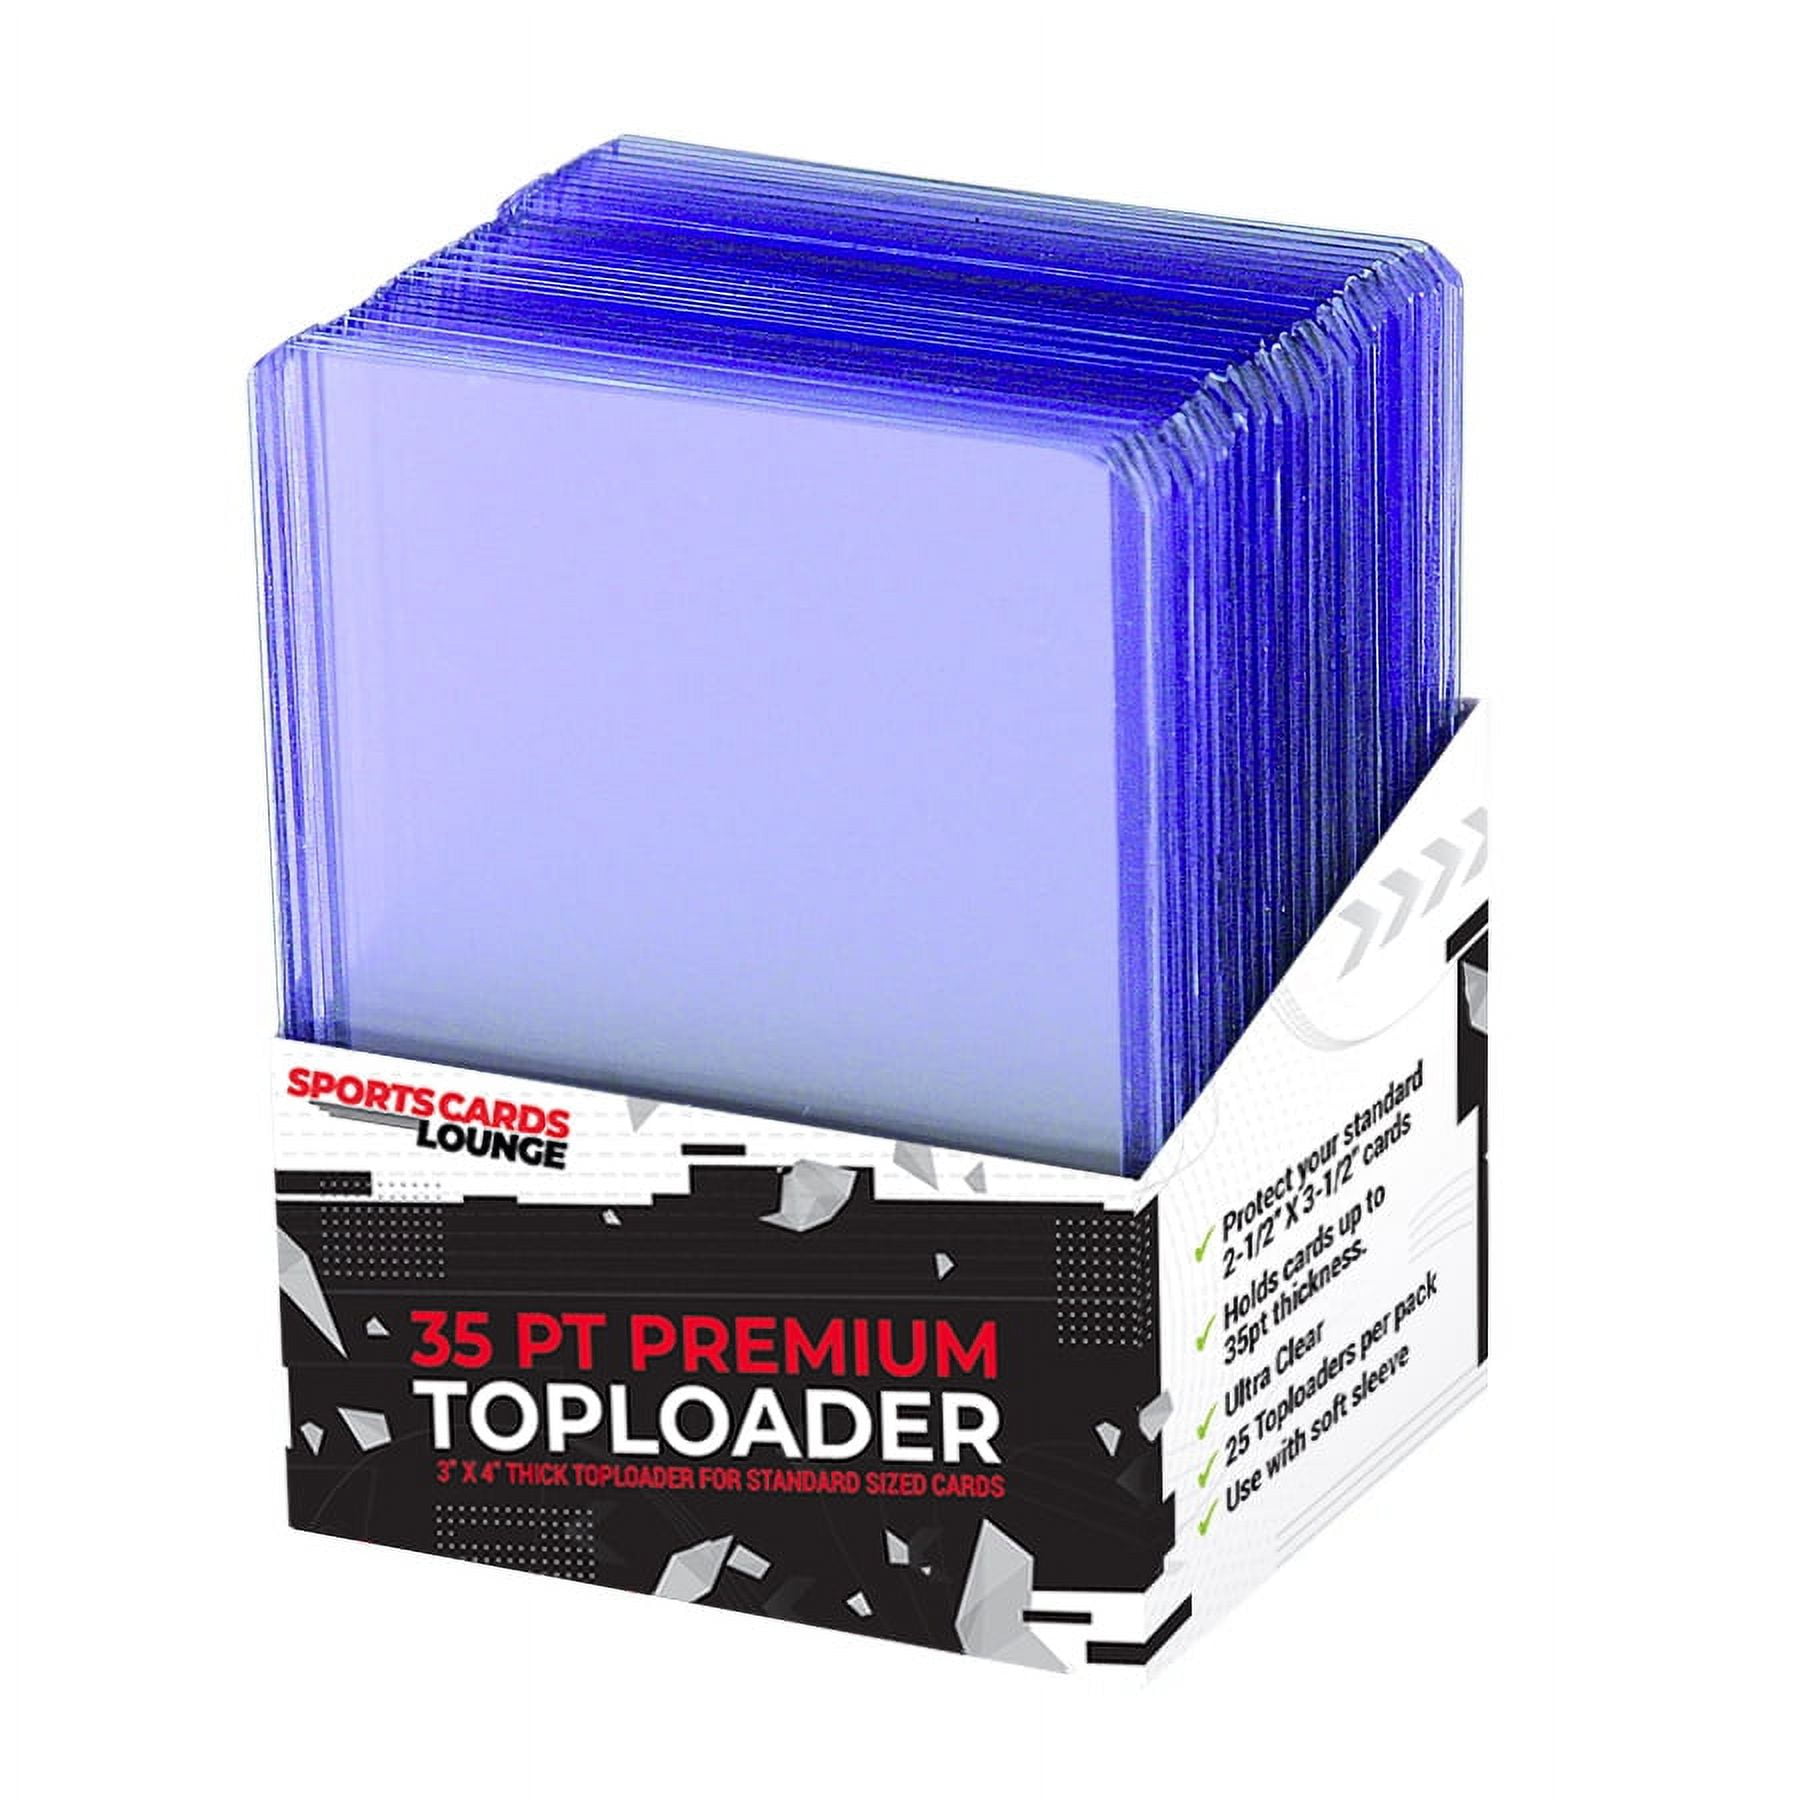 1 full case of 1000 Standard 3 x 4 Toploaders Collectible Supplies 35pt.  Top loaders